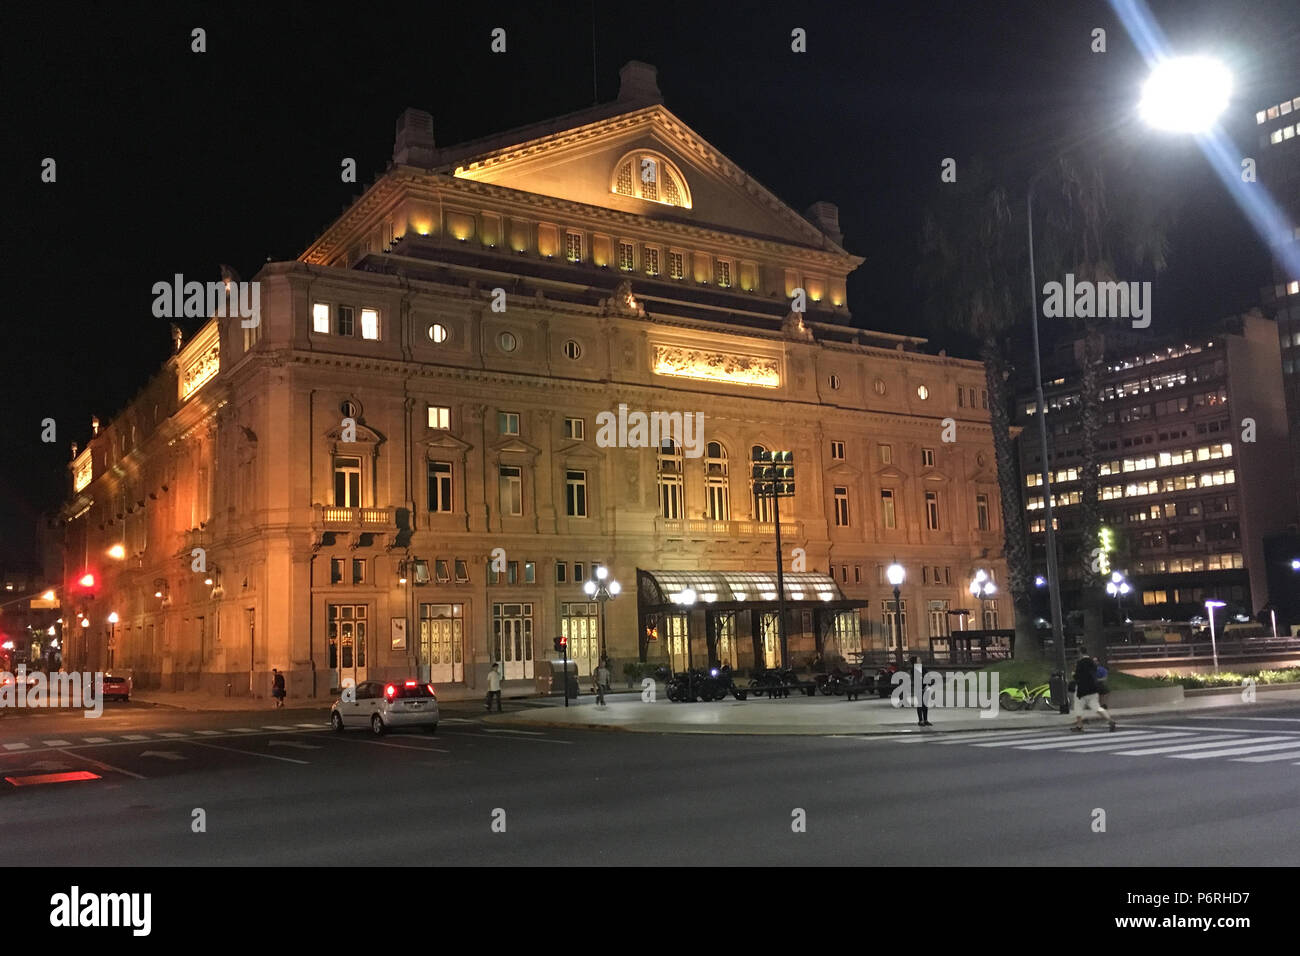 The Teatro Colón, Columbus Theatre, is the main opera house in Buenos Aires, Argentina. Acoustically within top 5 in the world. Stock Photo